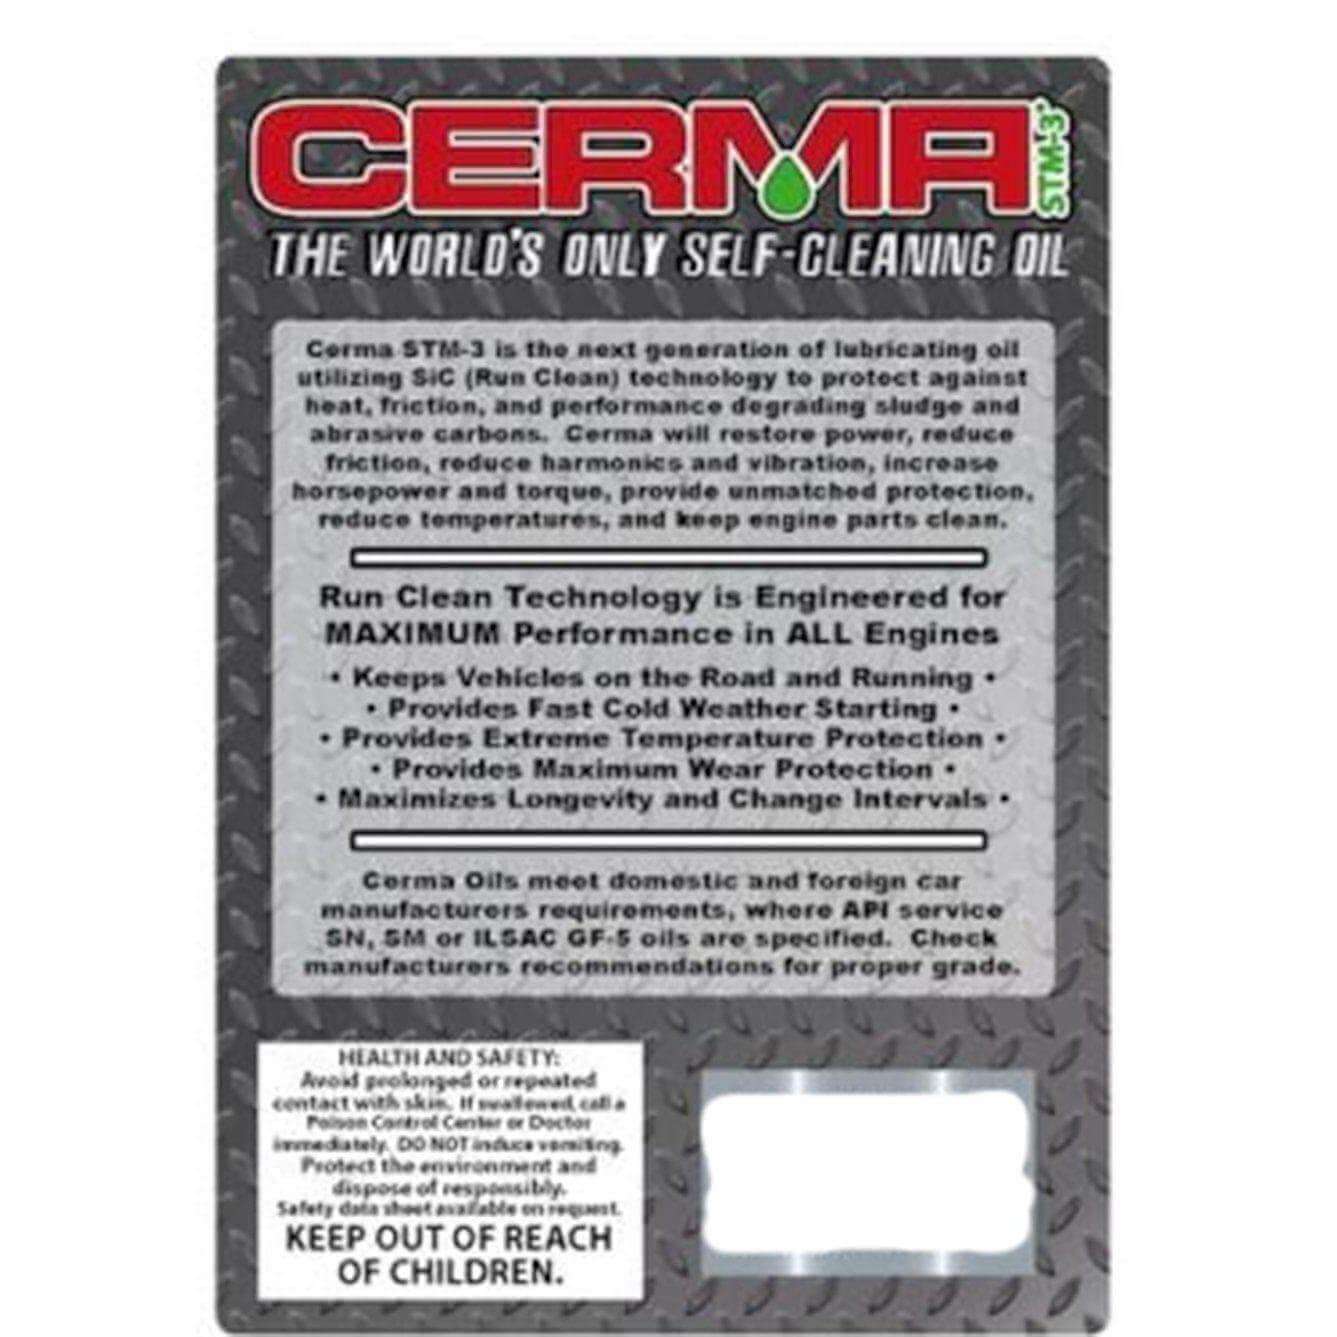 Cermax Ceramic 5w-30W Synthetic Motor Oil at $16.96 only from cermatreatment.com